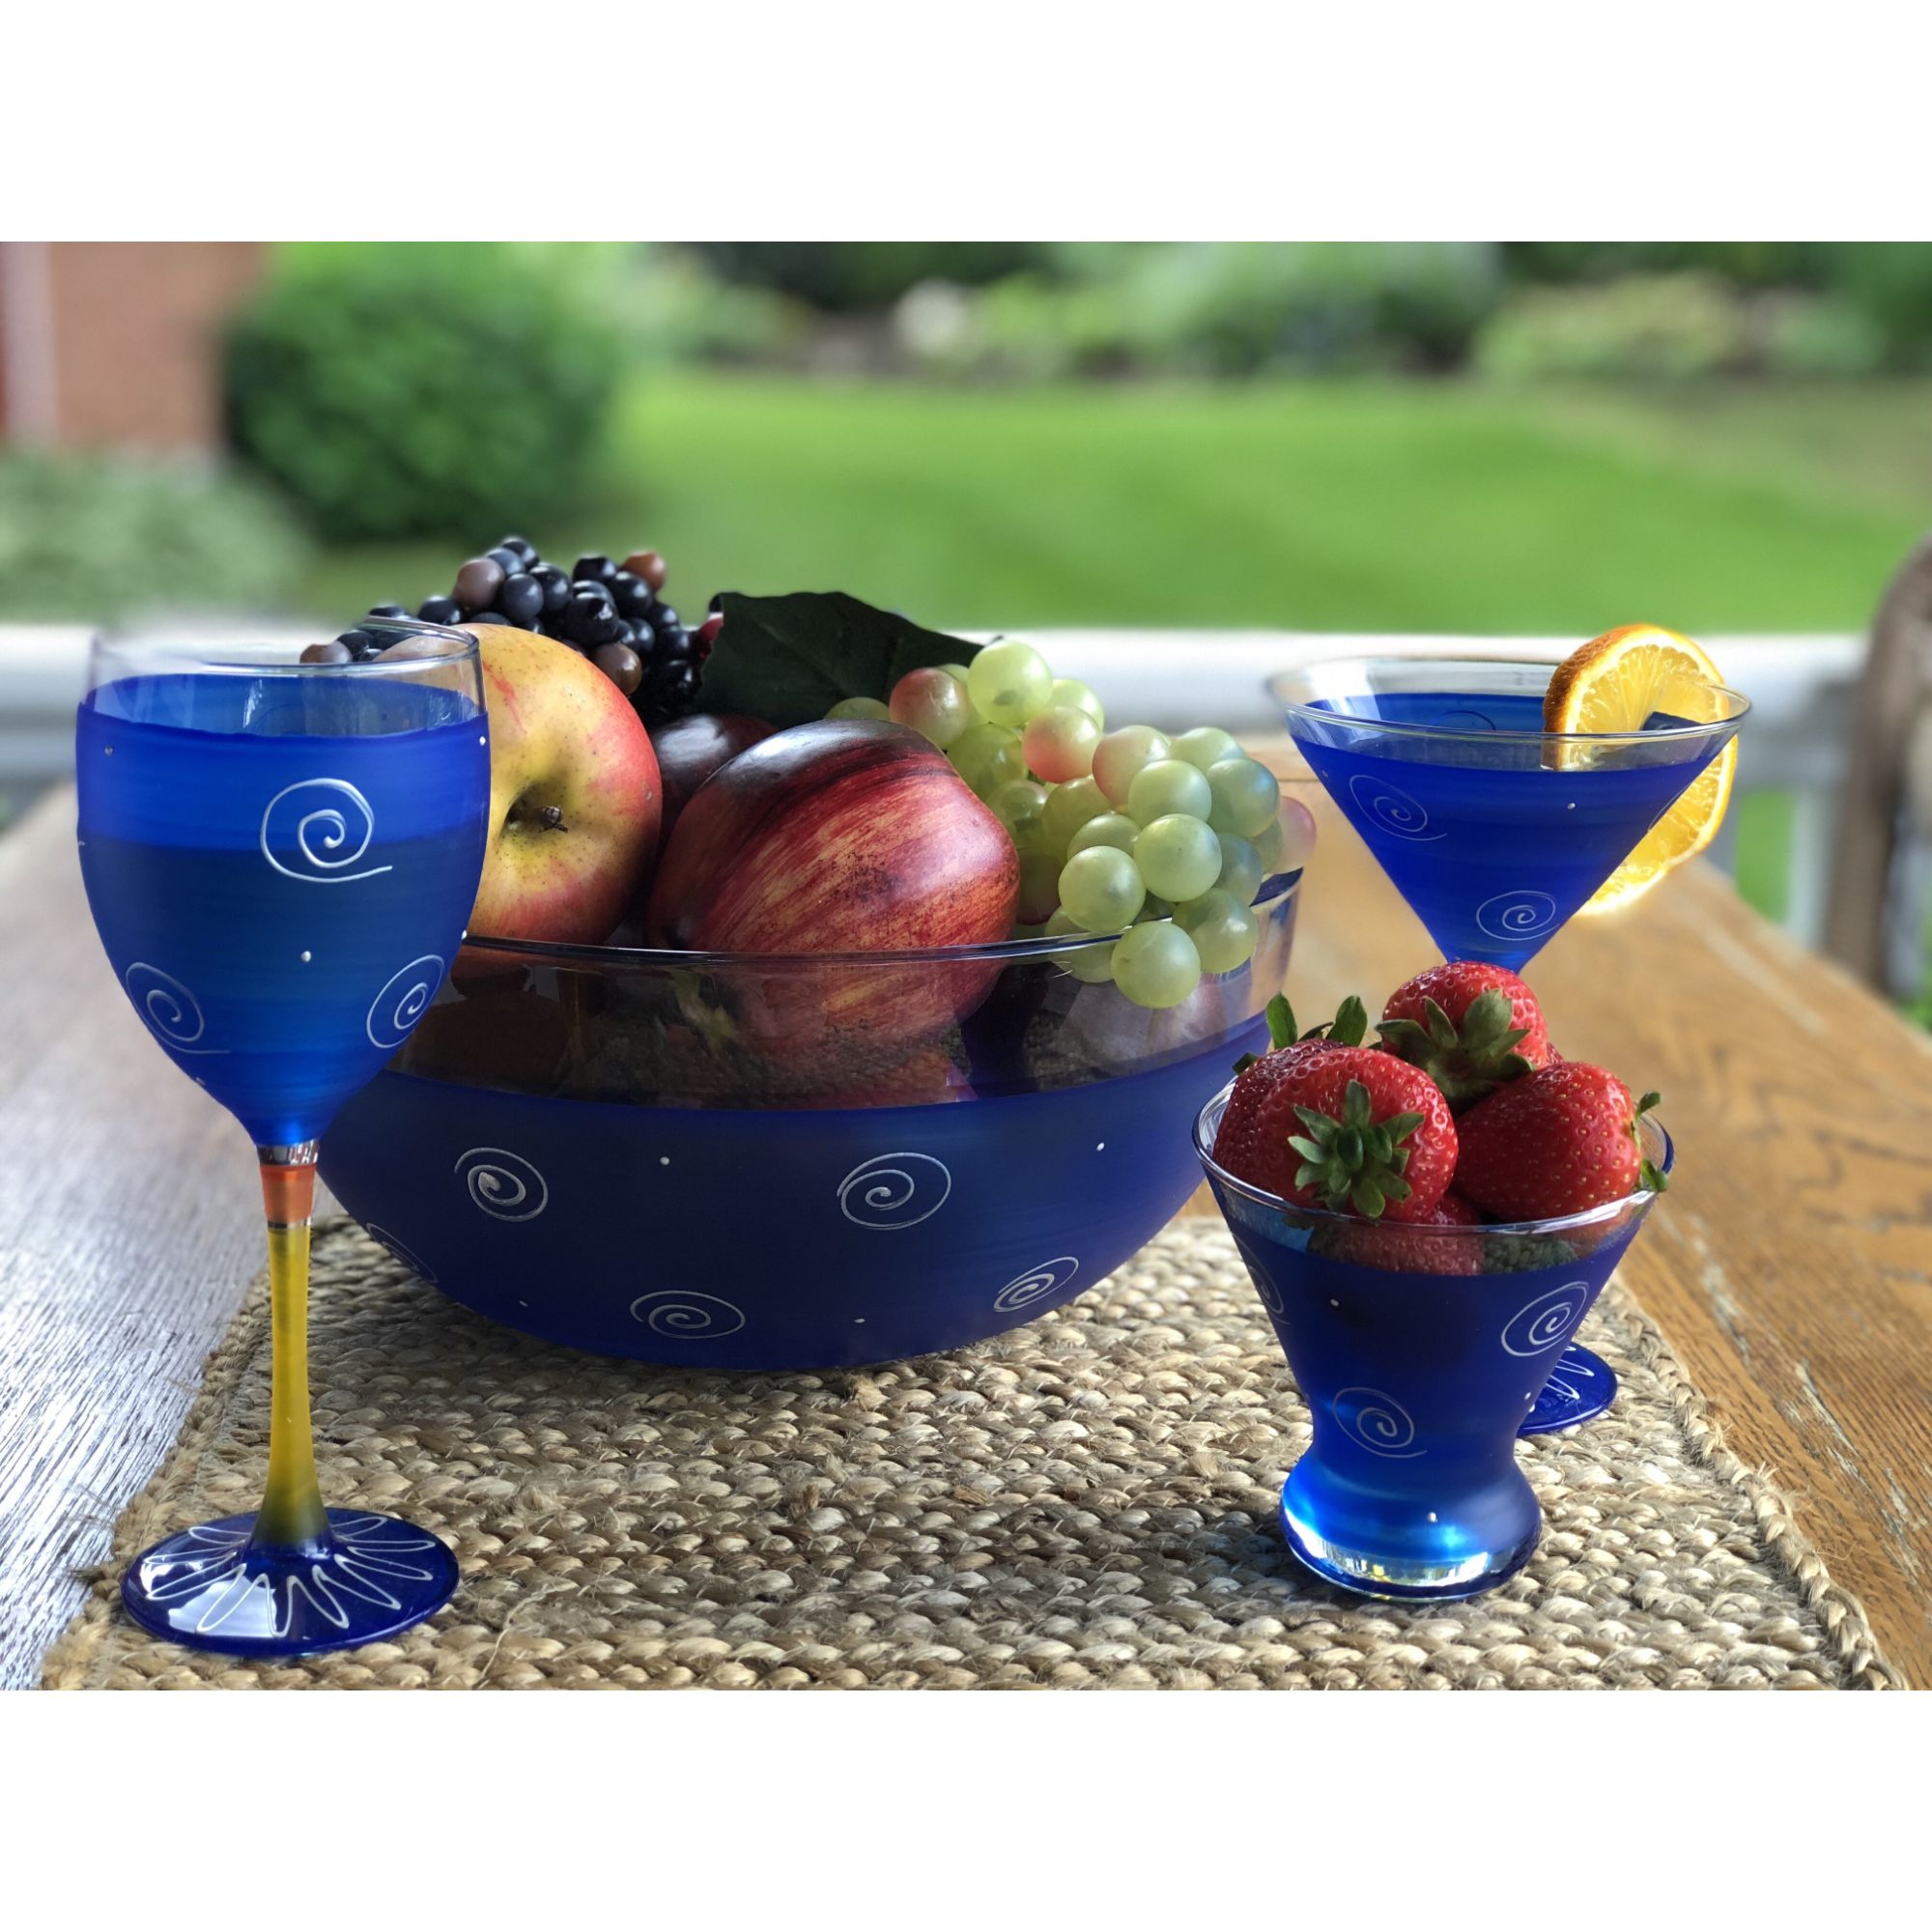 Crafted Creations Set of 2 Blue and White Hand Painted Wine Drinking Glasses 10.5 oz.